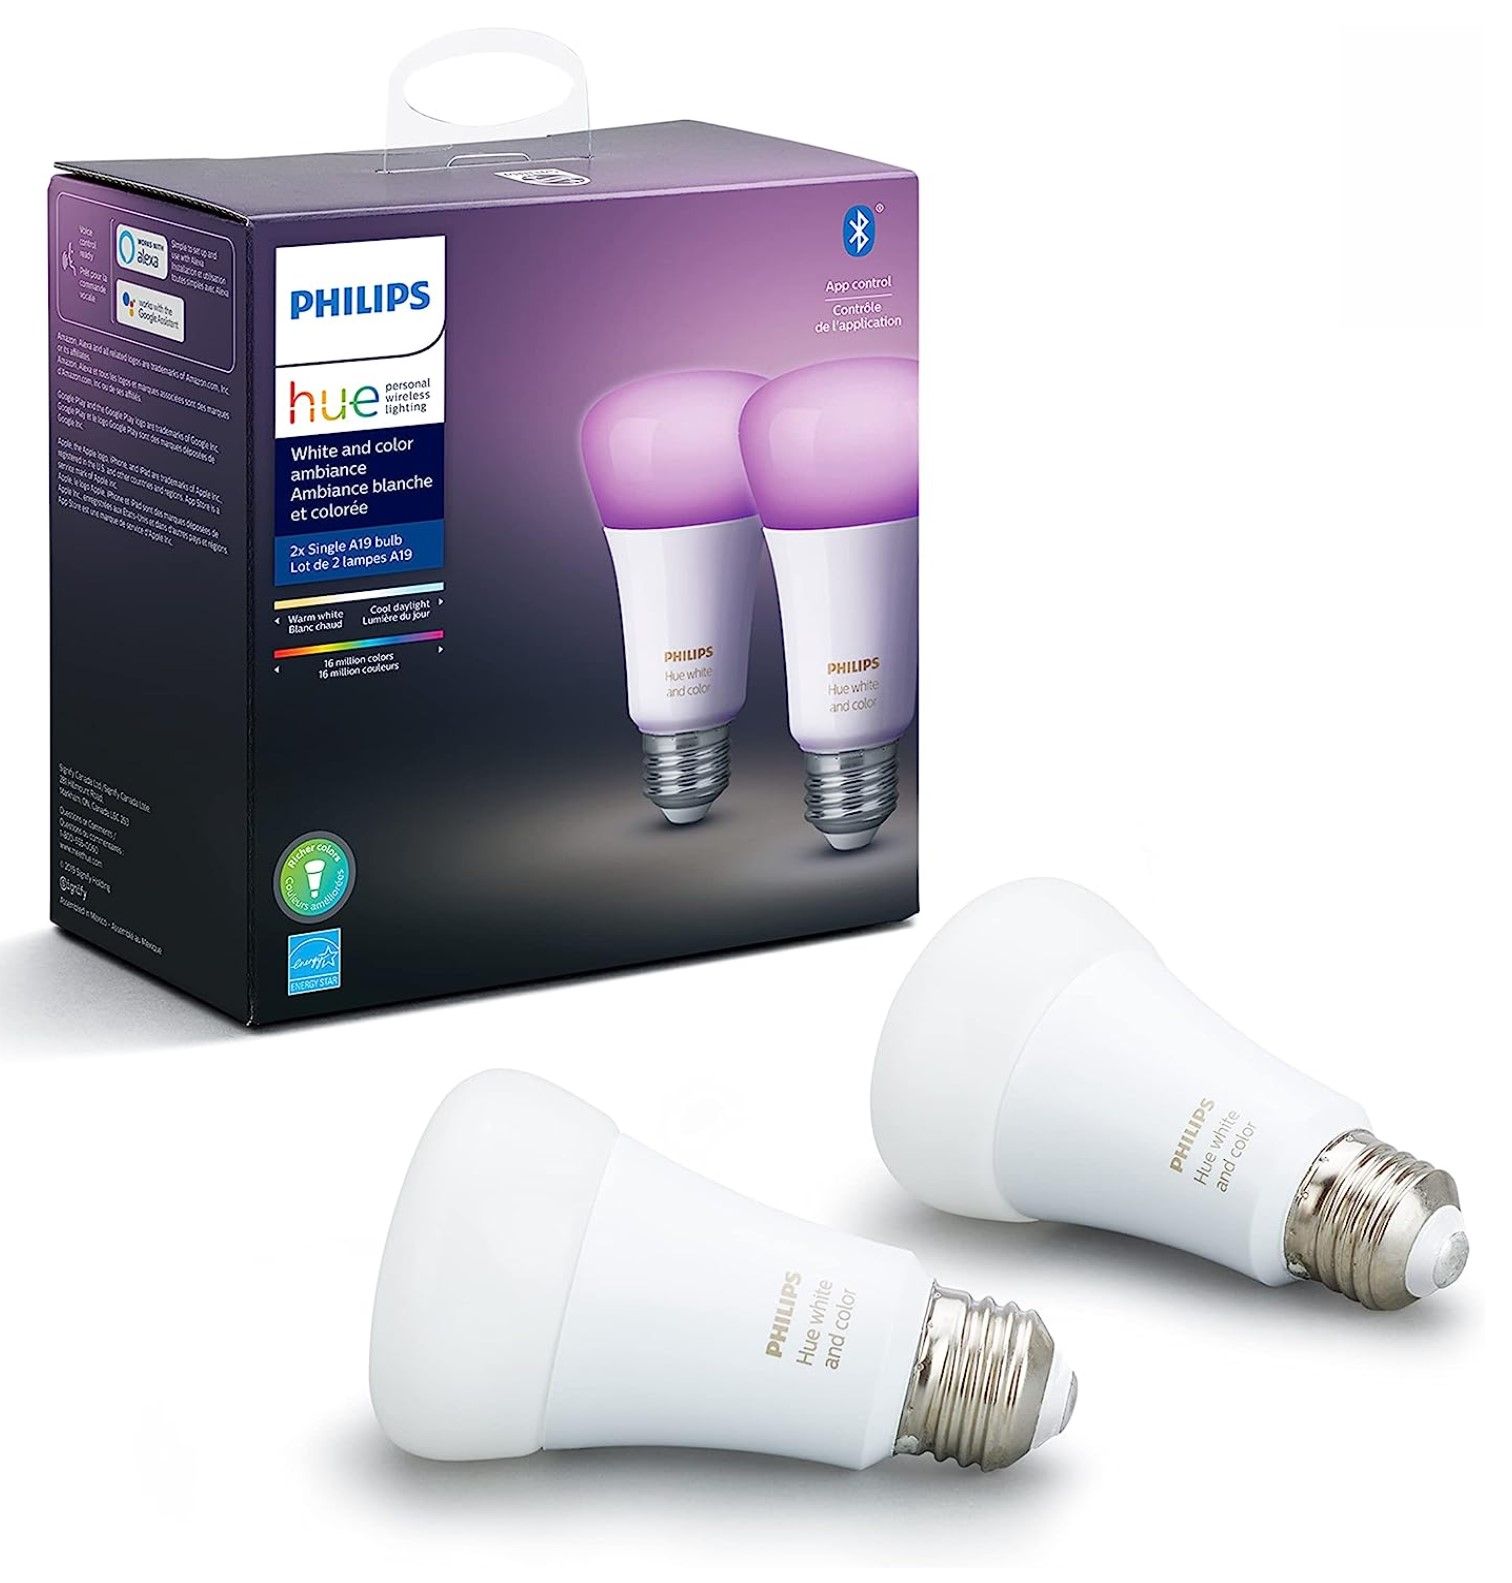 Philips Hue White and Color A19 LED Smart Bulb